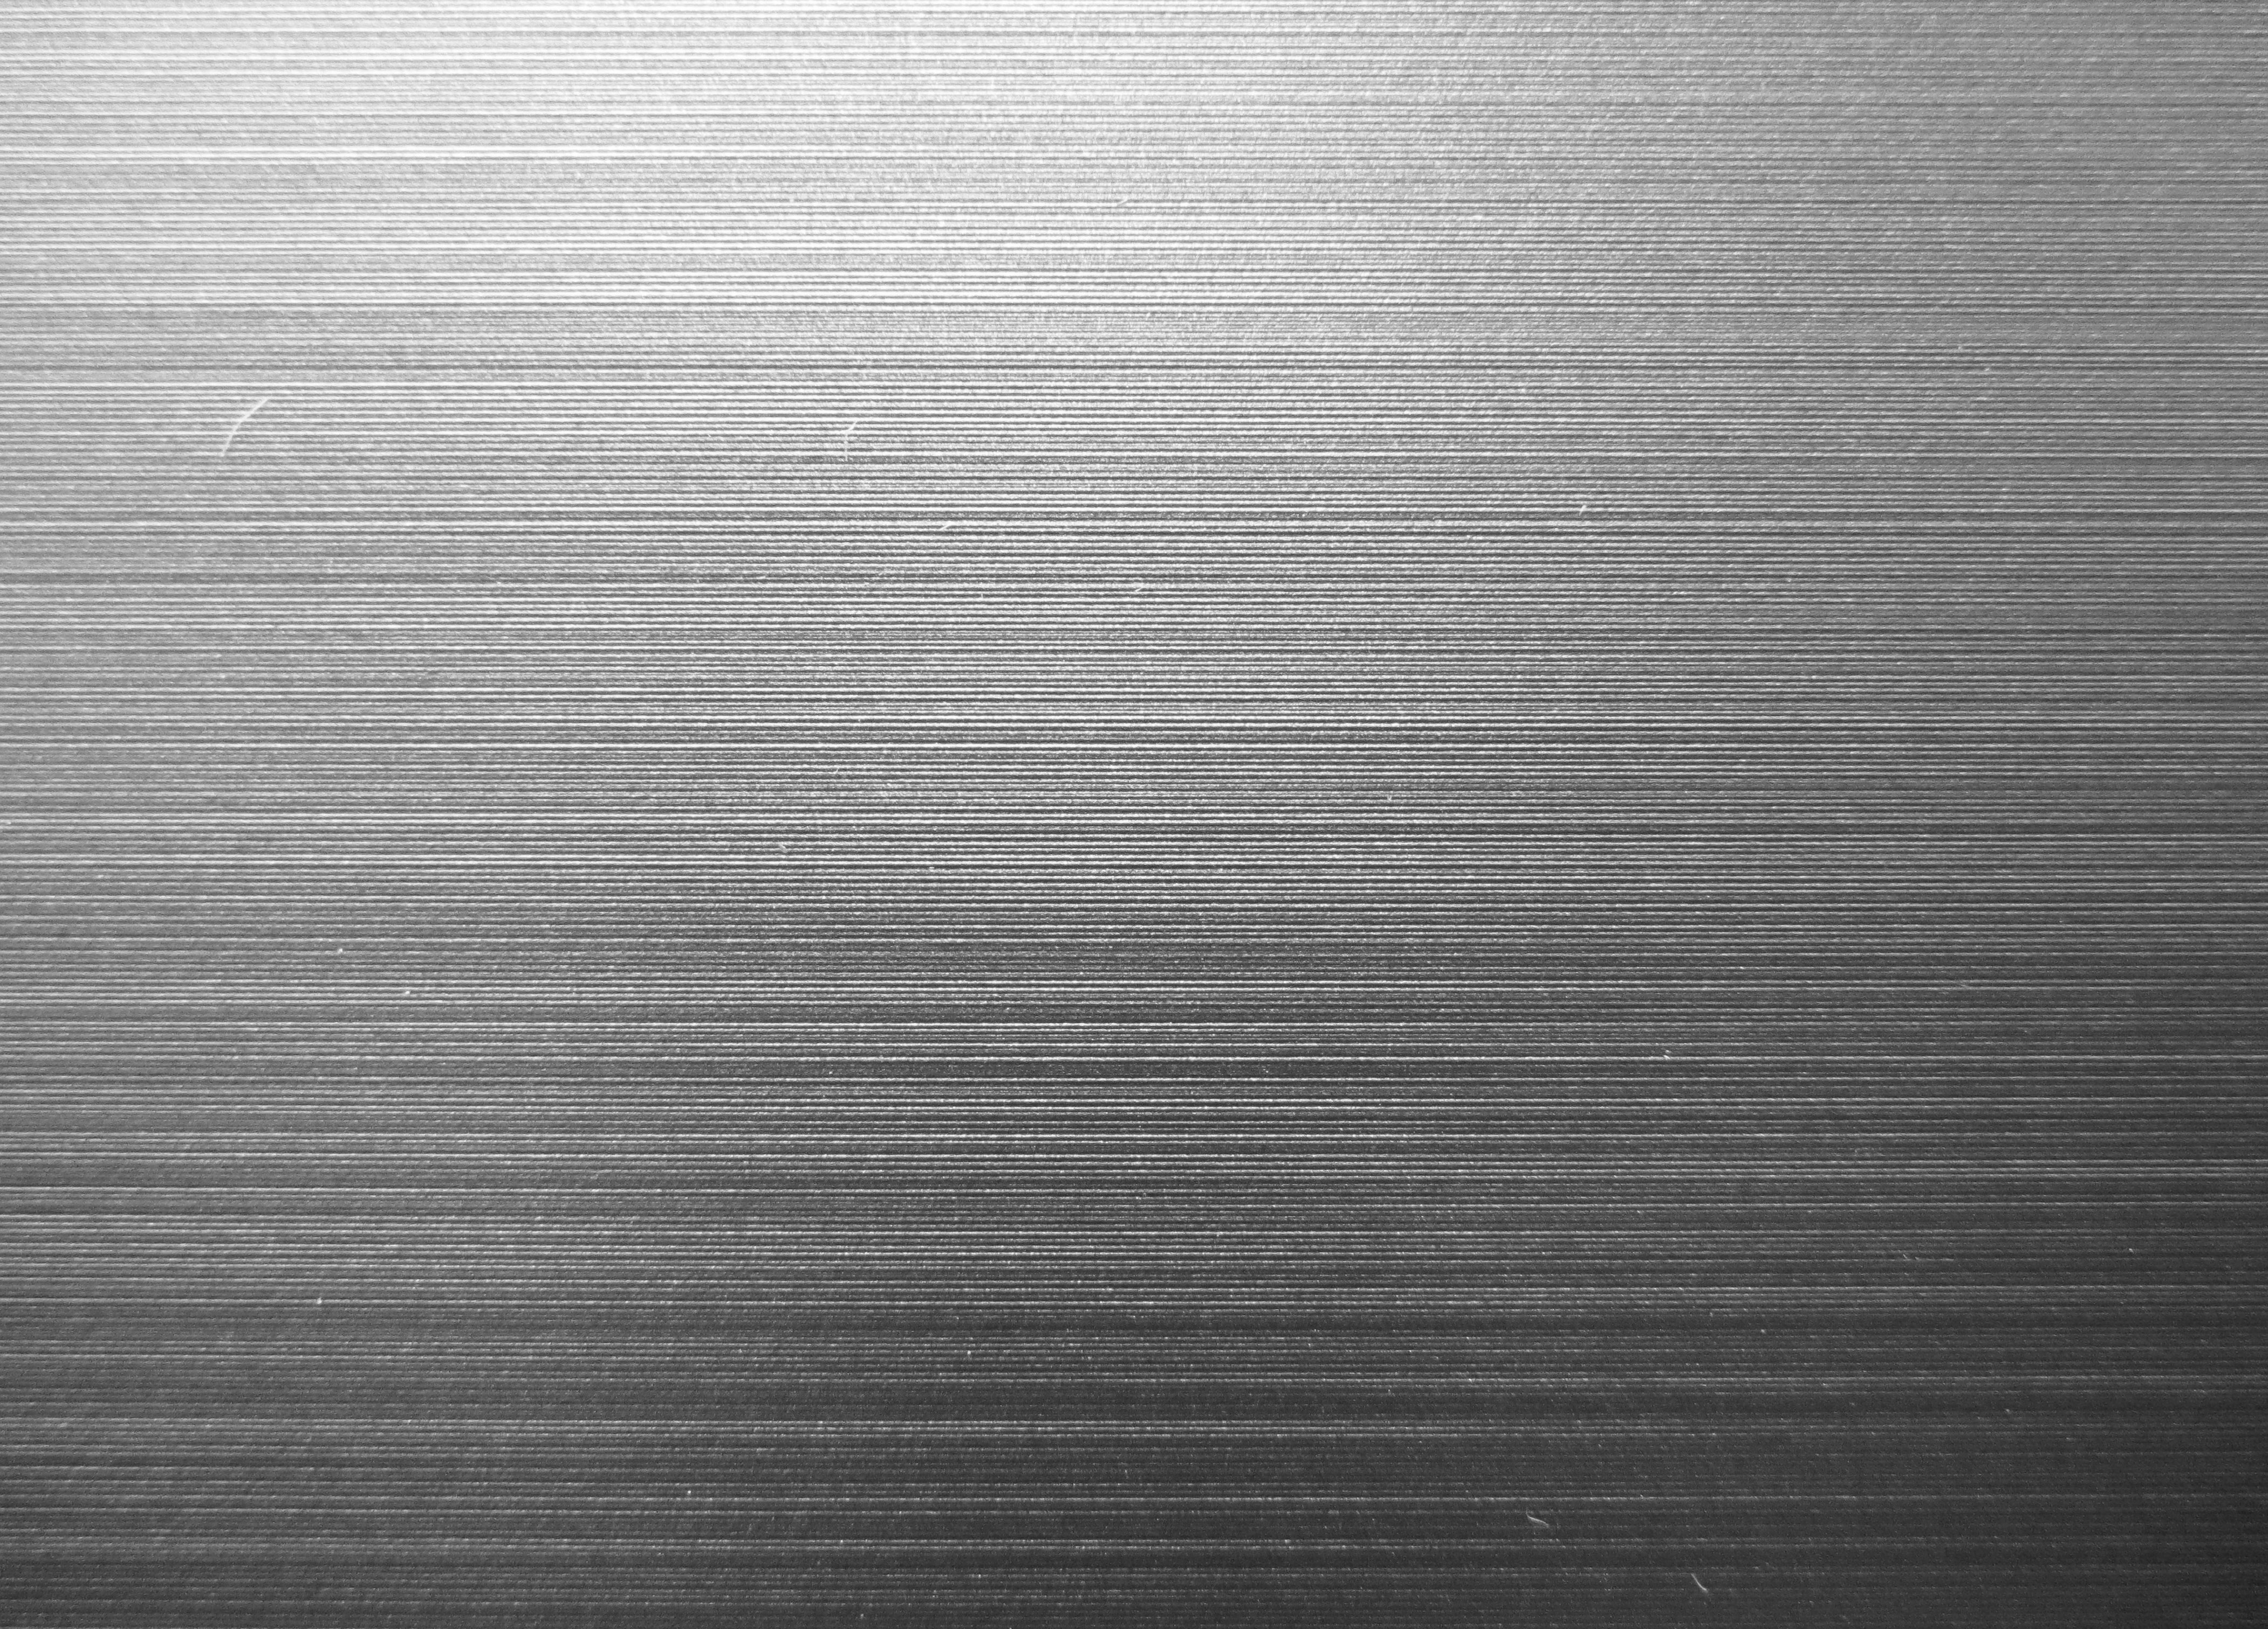 Tiled Metal Texture HD Wallpaper Car Pictures